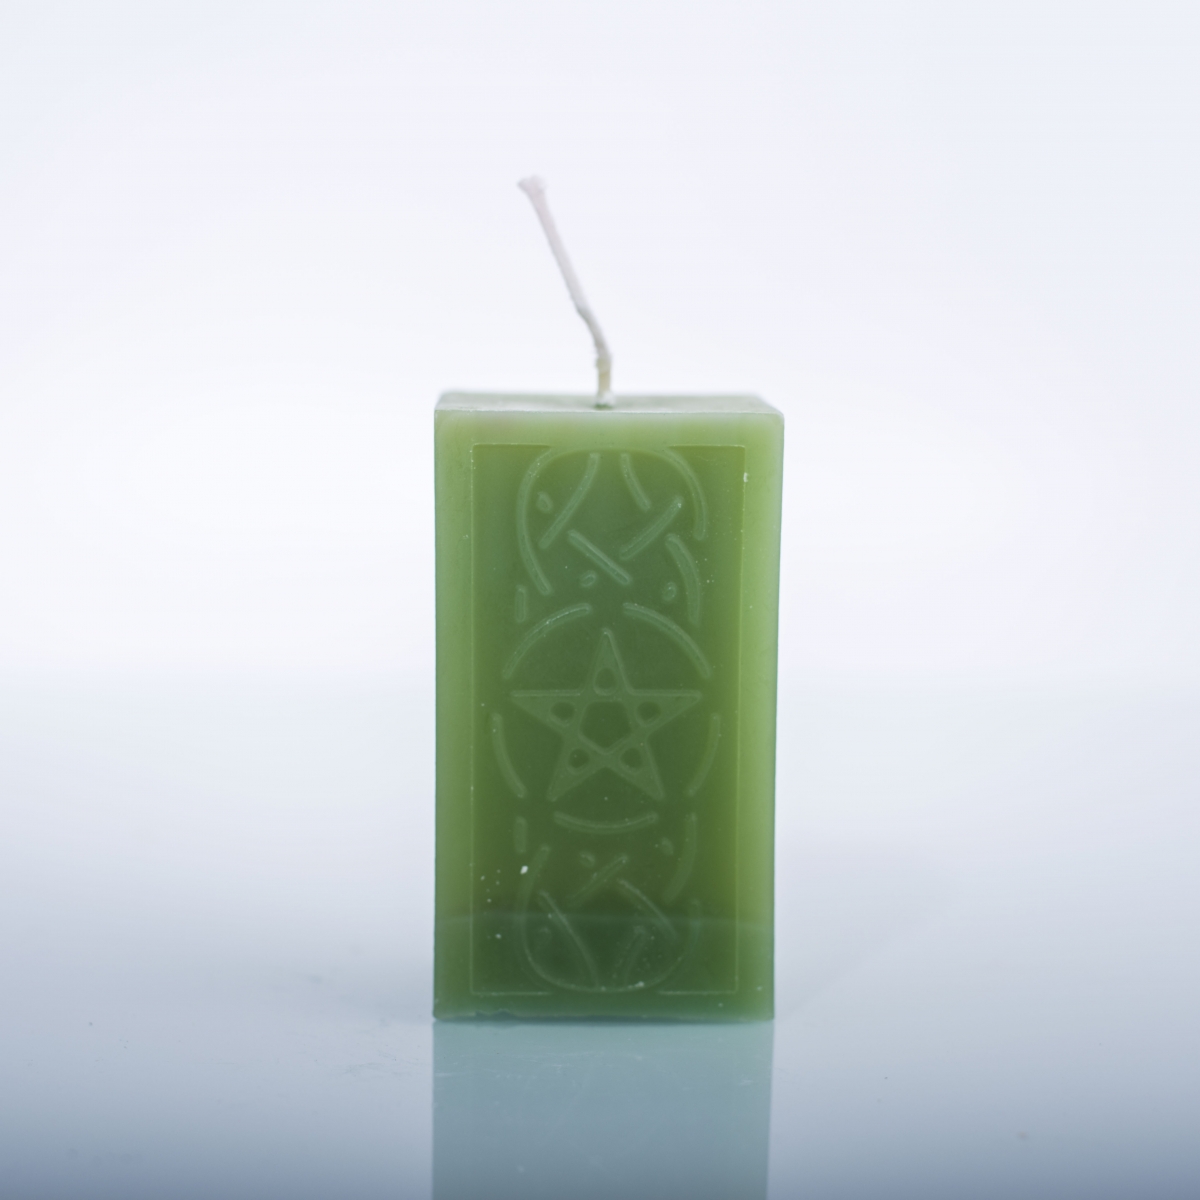 Witchcraft Candles :Green Color ,Cube Shape ,Carved Pentagram Symbol ,China Factory ,Wholesale Price-HOWCANDLE-Candles,Scented Candles,Aromatherapy Candles,Soy Candles,Vegan Candles,Jar Candles,Pillar Candles,Candle Gift Sets,Essential Oils,Reed Diffuser,Candle Holder,